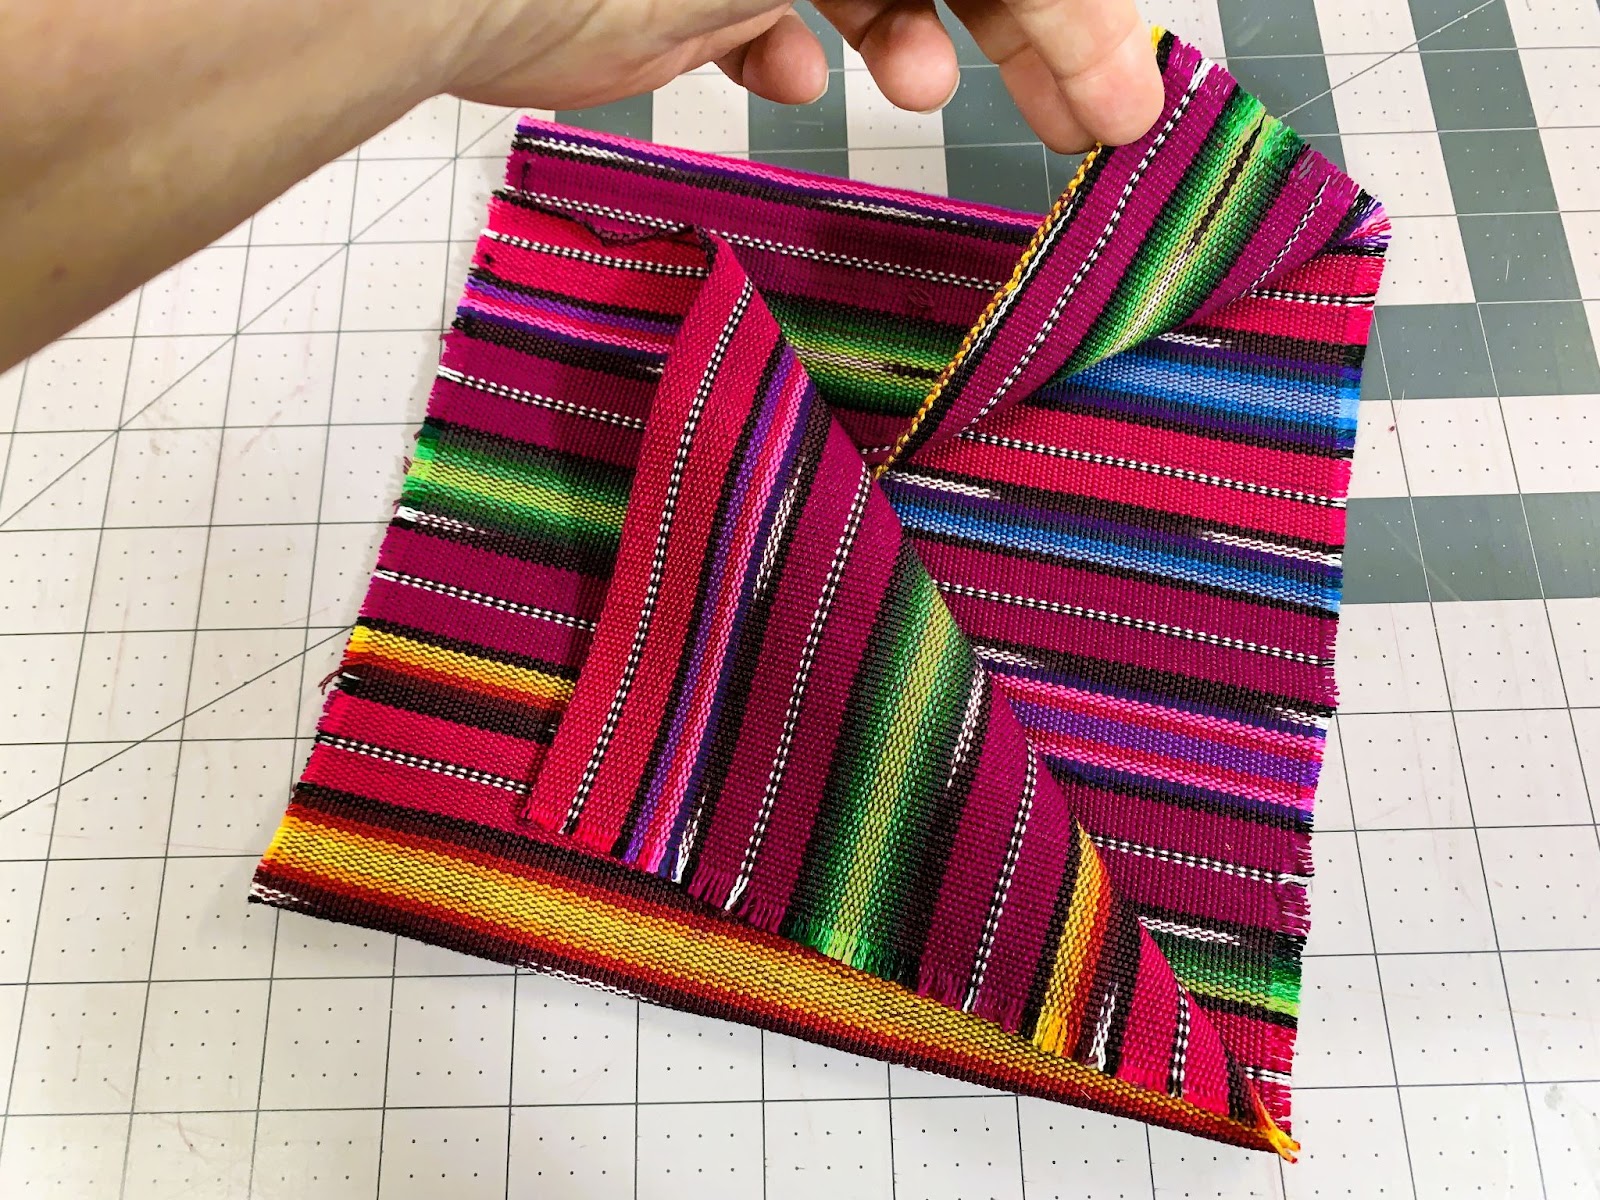 pocket with a folded closure